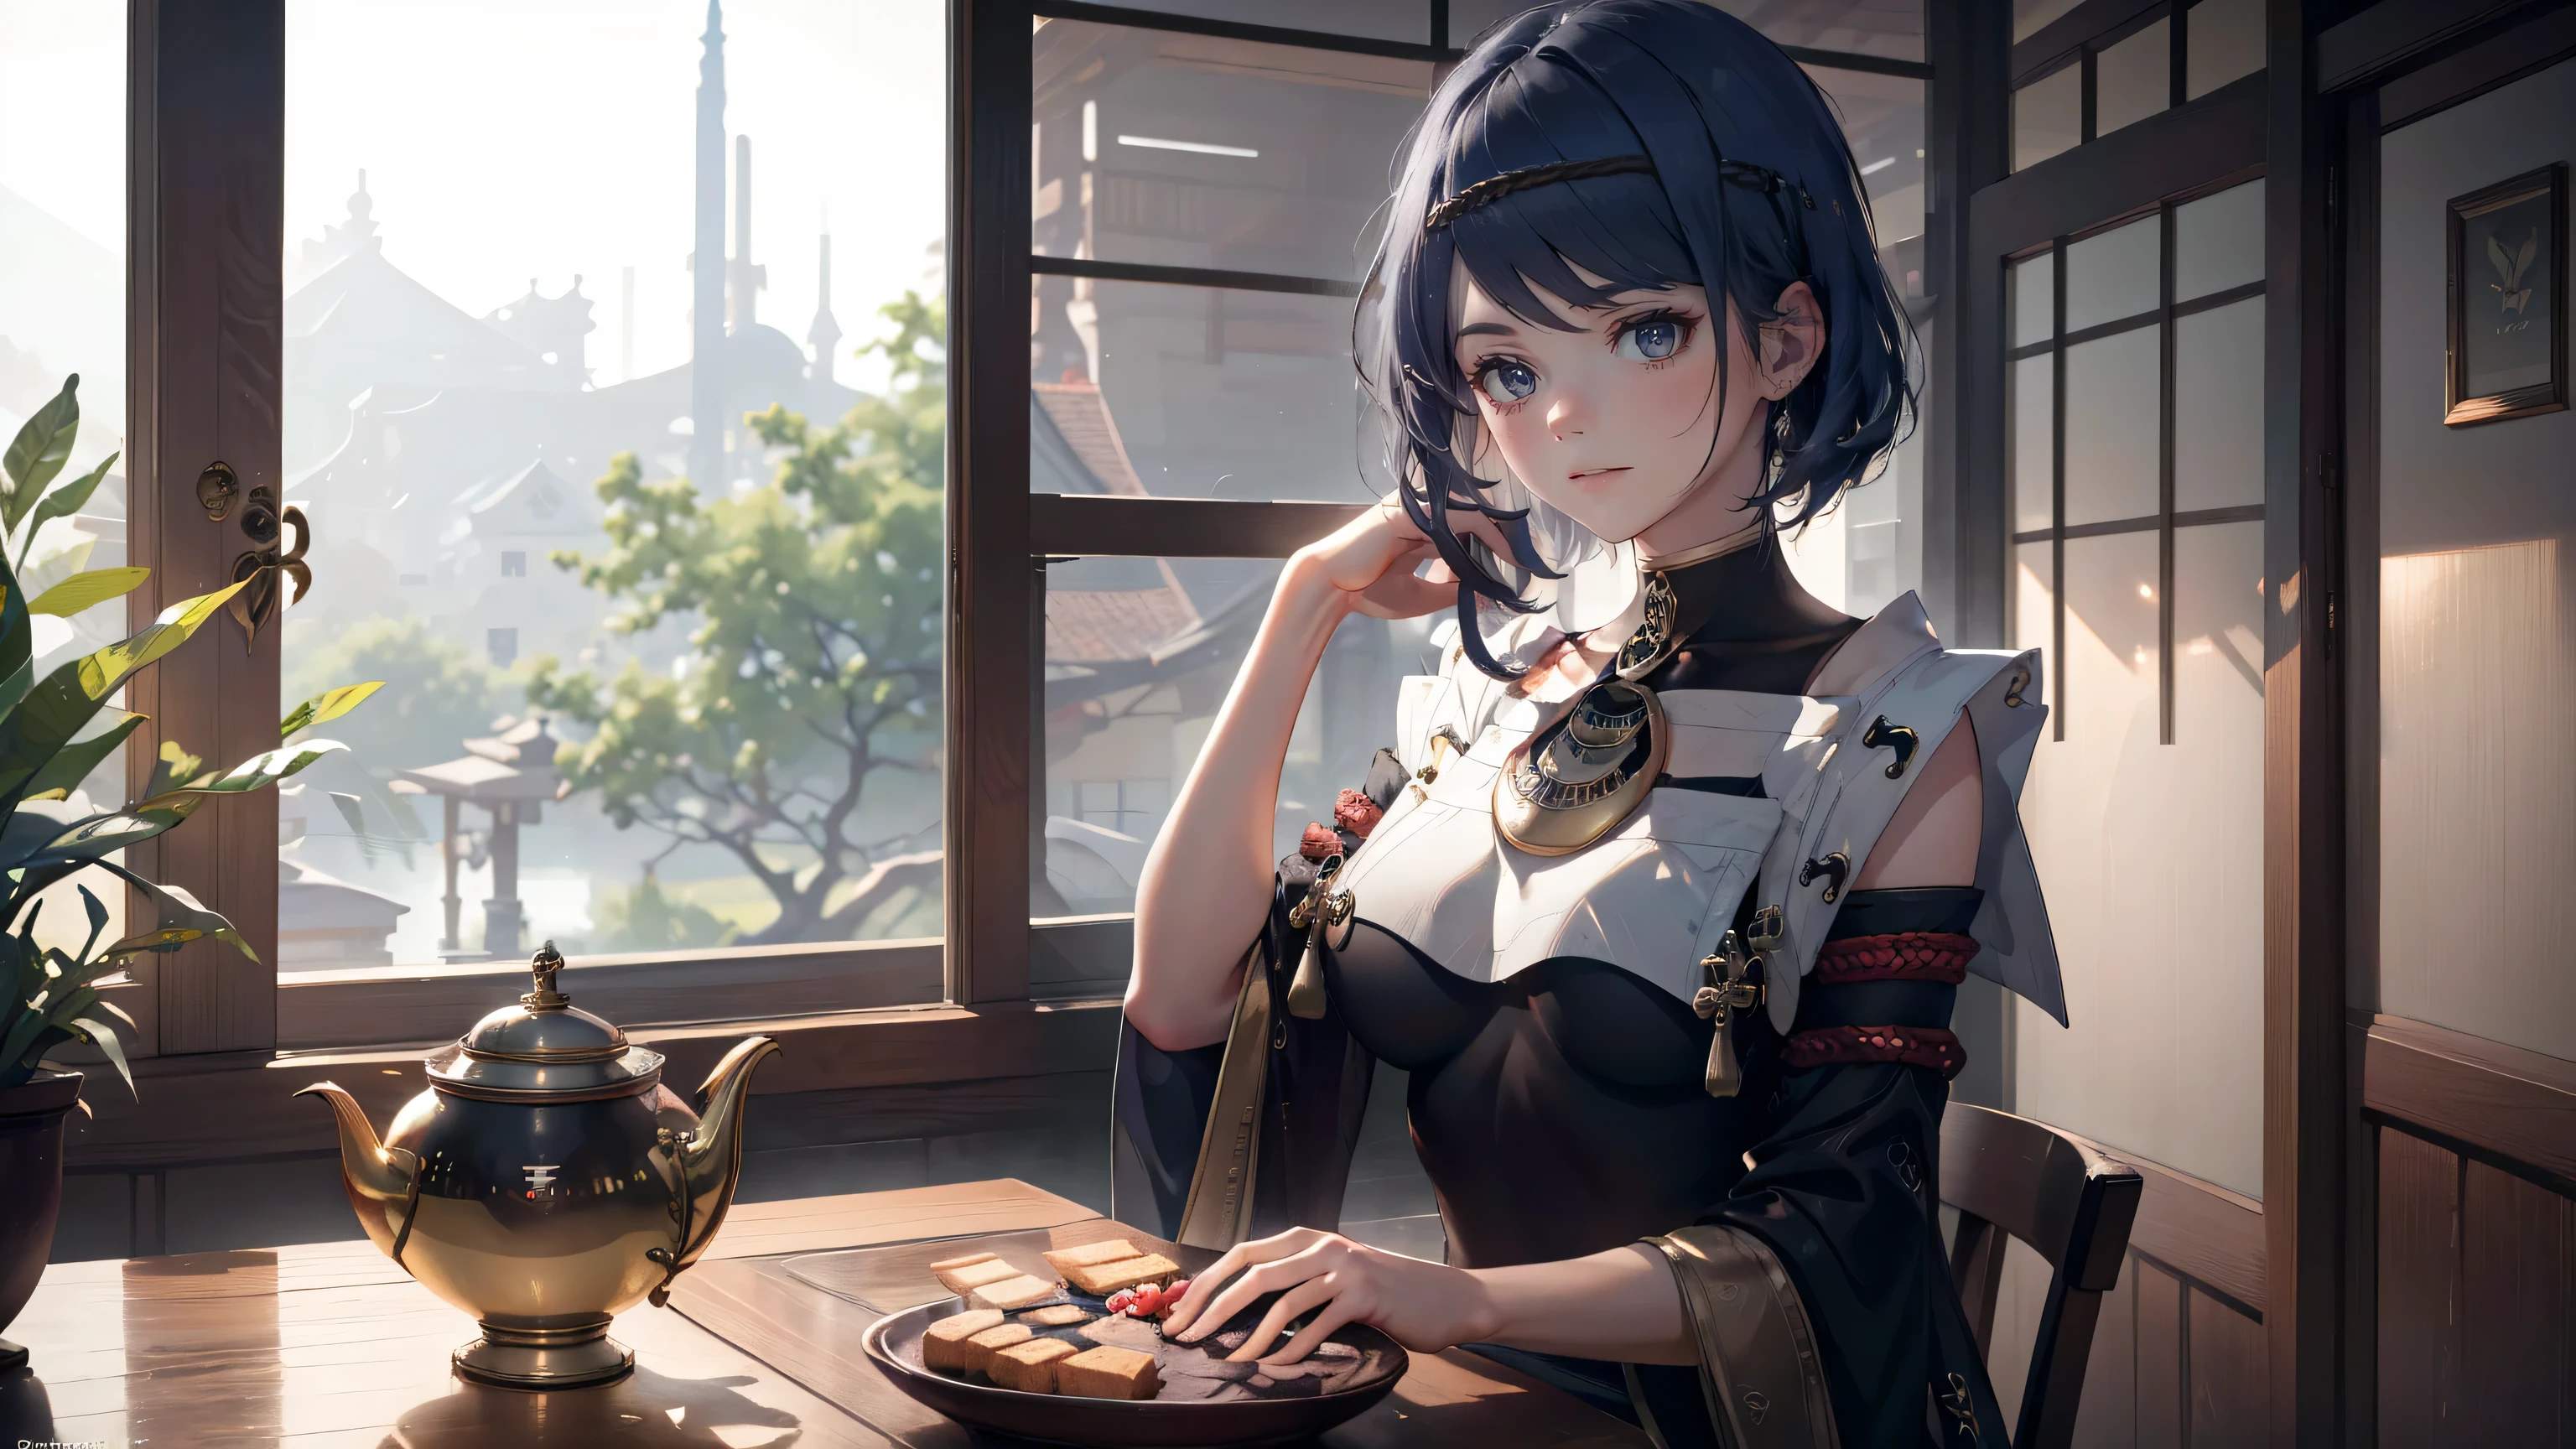 (best quality,8k,highres,masterpiece:1.2),(realistic,photorealistic,photo-realistic:1.37), In purple eyes, Classic maid outfit, traditional Japanese bakery,beautiful detailed eyes,happiness,glowing eyes,smiling,peaceful atmosphere,traditional Japanese clothes,working(best quality,Full range,advert:1.2),bright and warm,Sweet and sleepy,complete happiness,bright smile,sakura tree,tranquil,aroma scent,dreamlike,vivid colors,subtle lighting,traditional Japanese tea set,lively ambiance